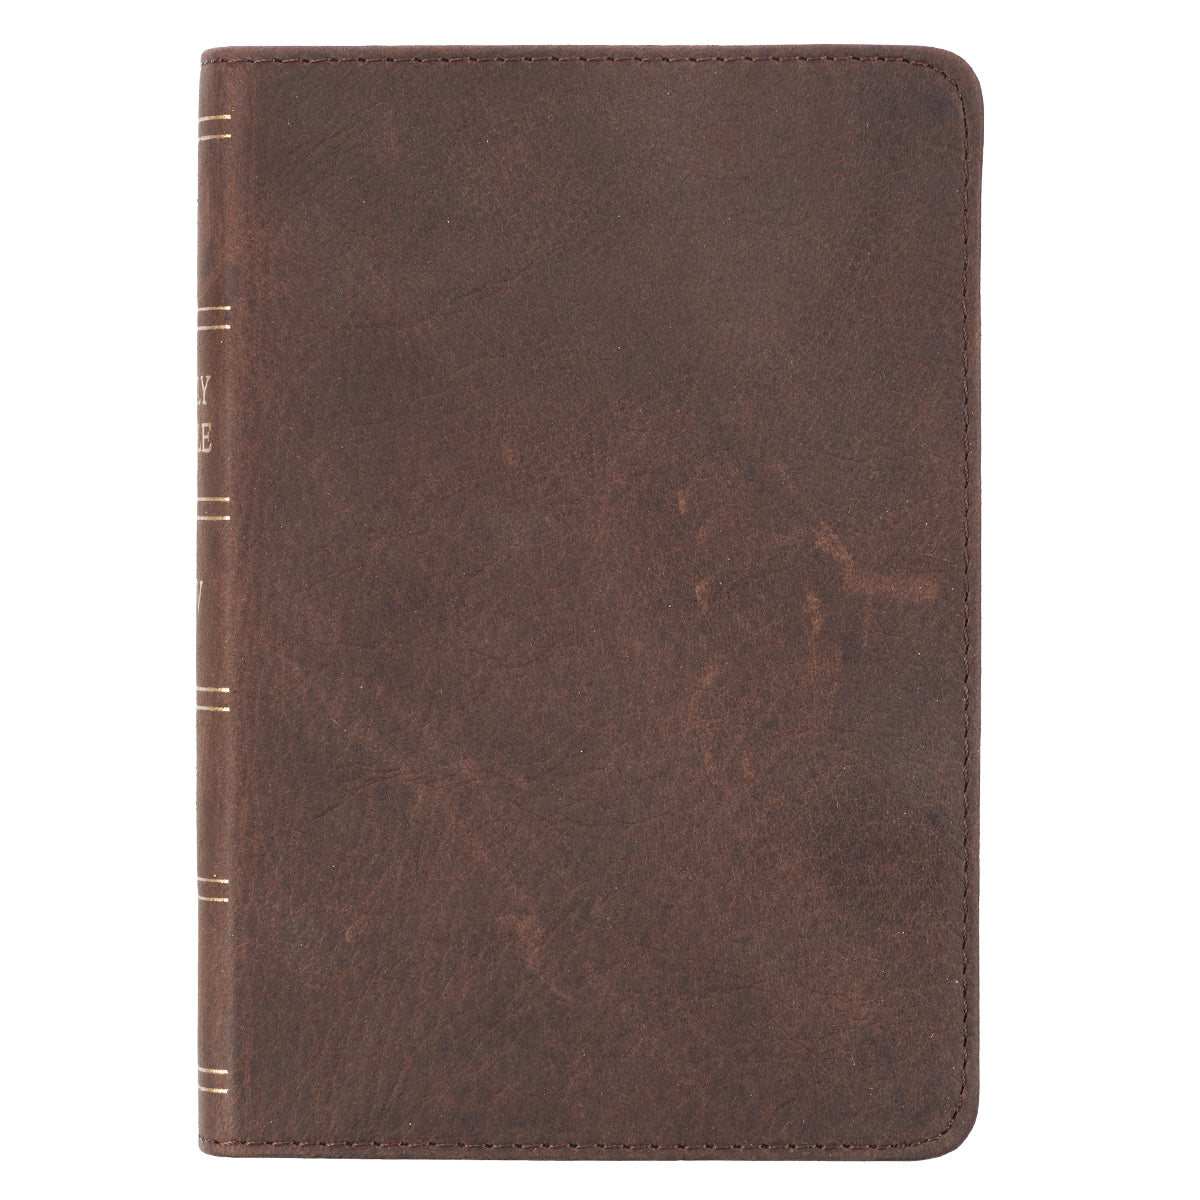 Image of KJV Large Print Premium Leather Compact Bible other